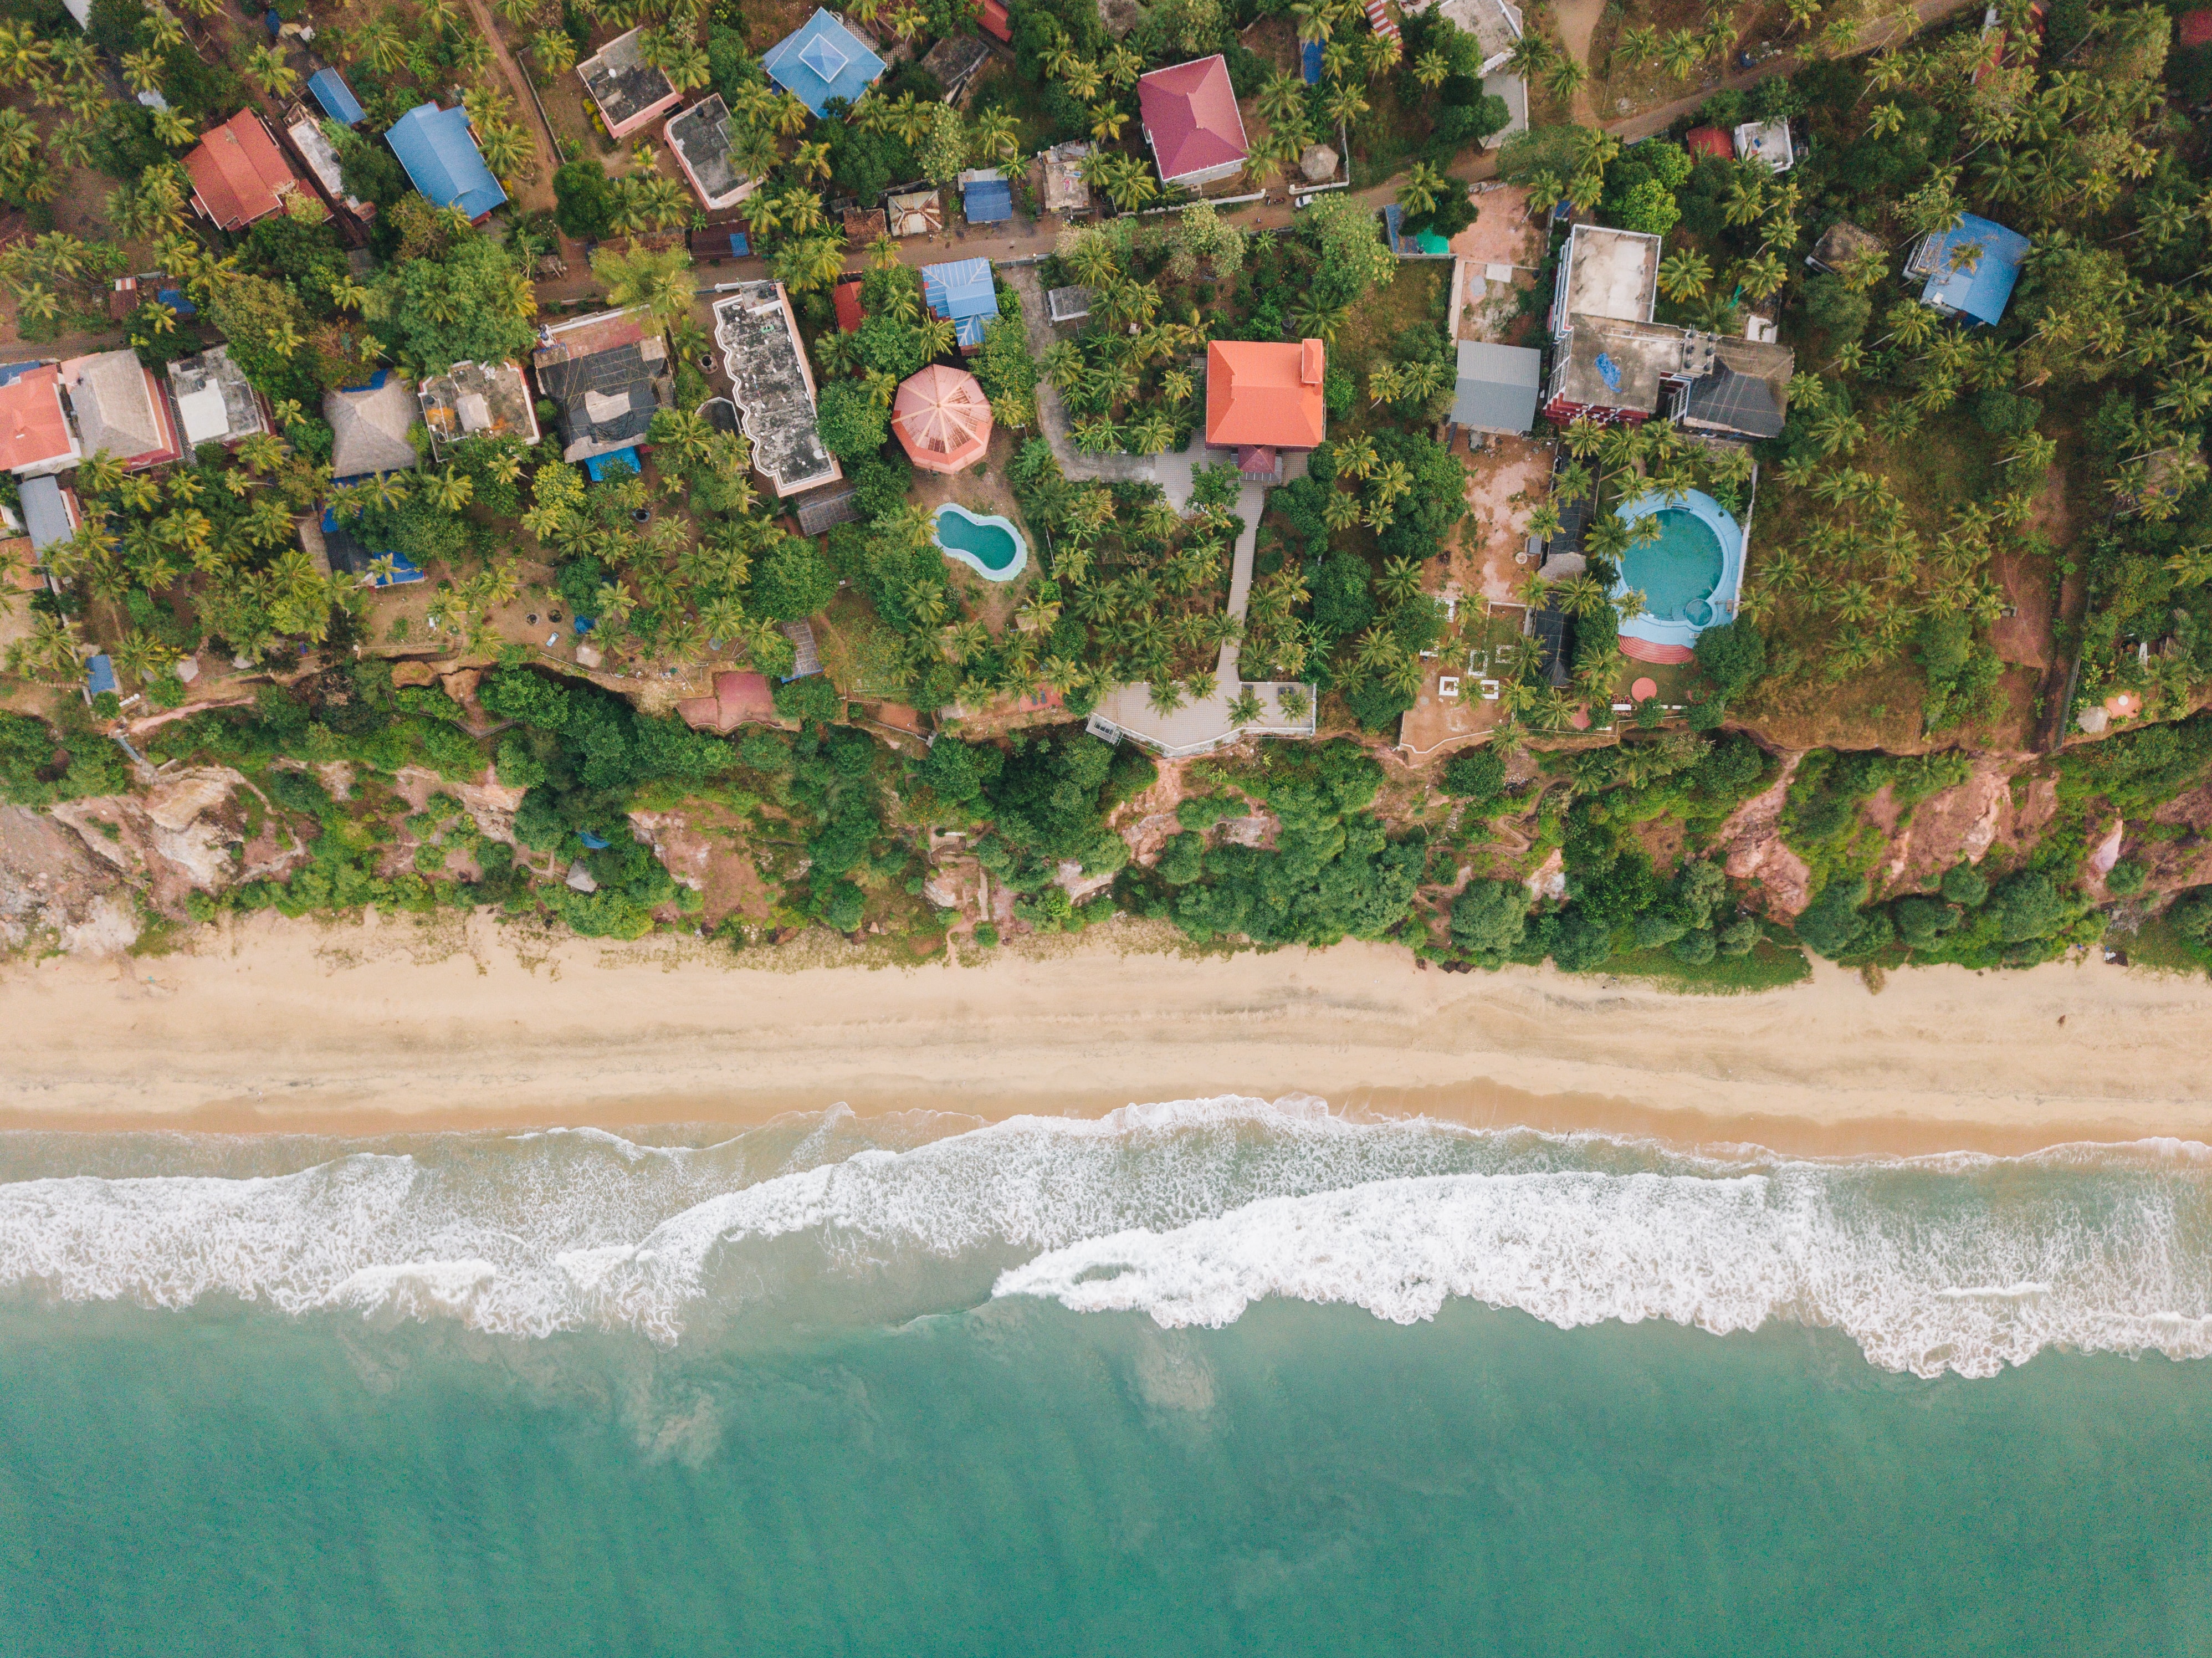 vertical wallpaper shore, view from above, nature, beach, palms, building, bank